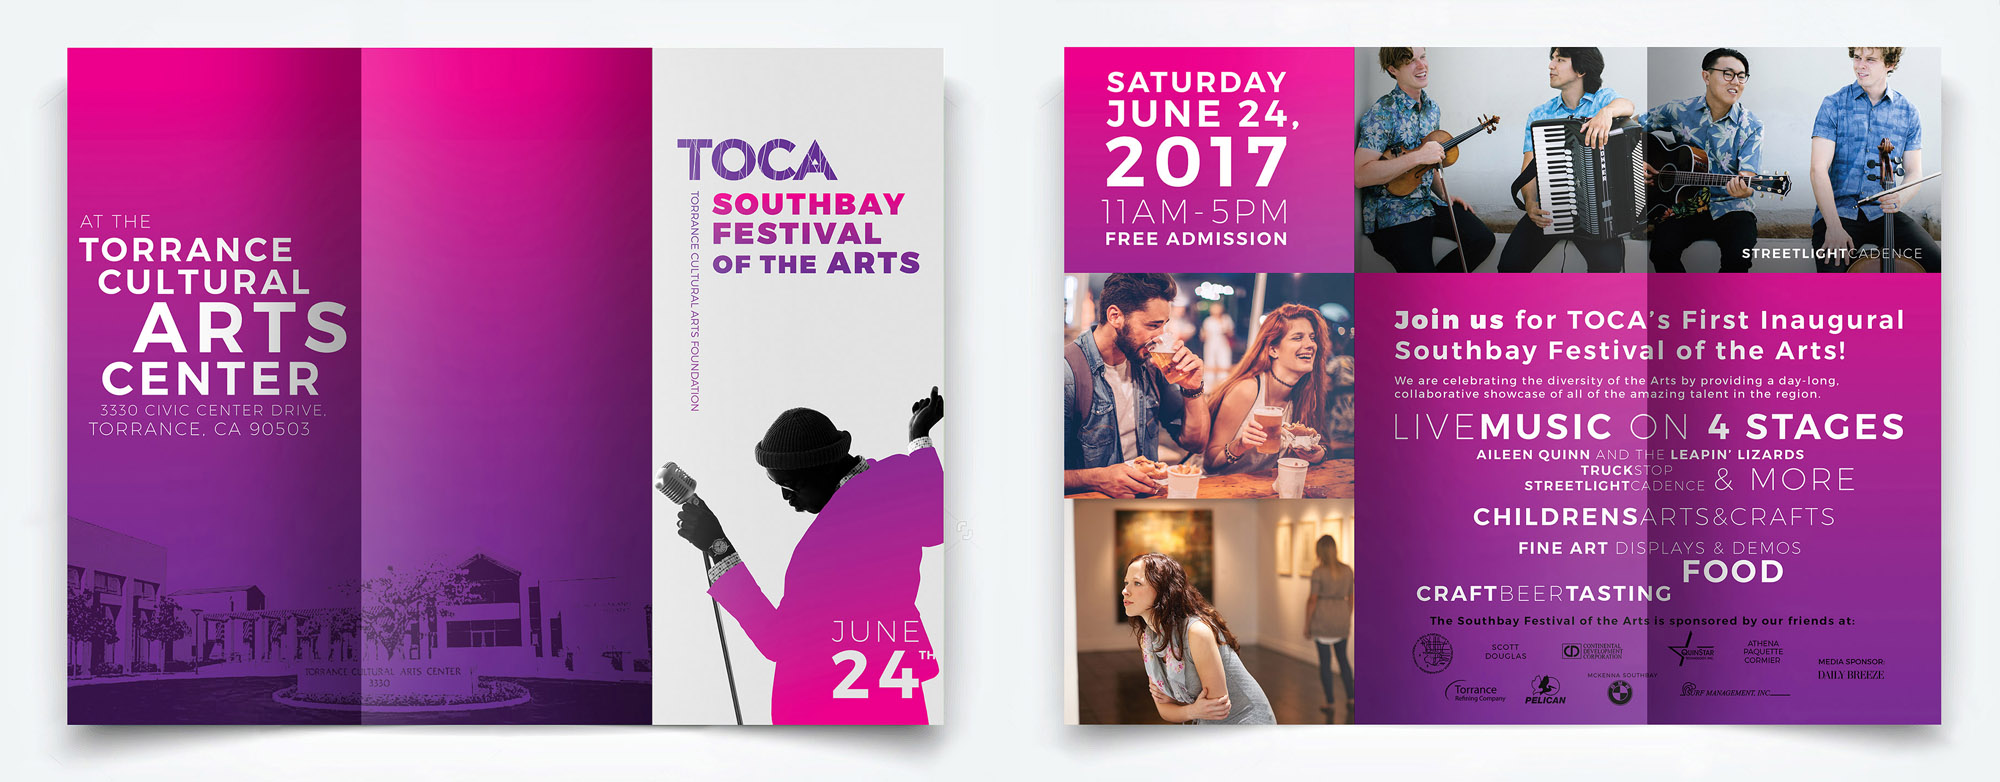 Brochure for TOCA Southbay Festival of the Arts